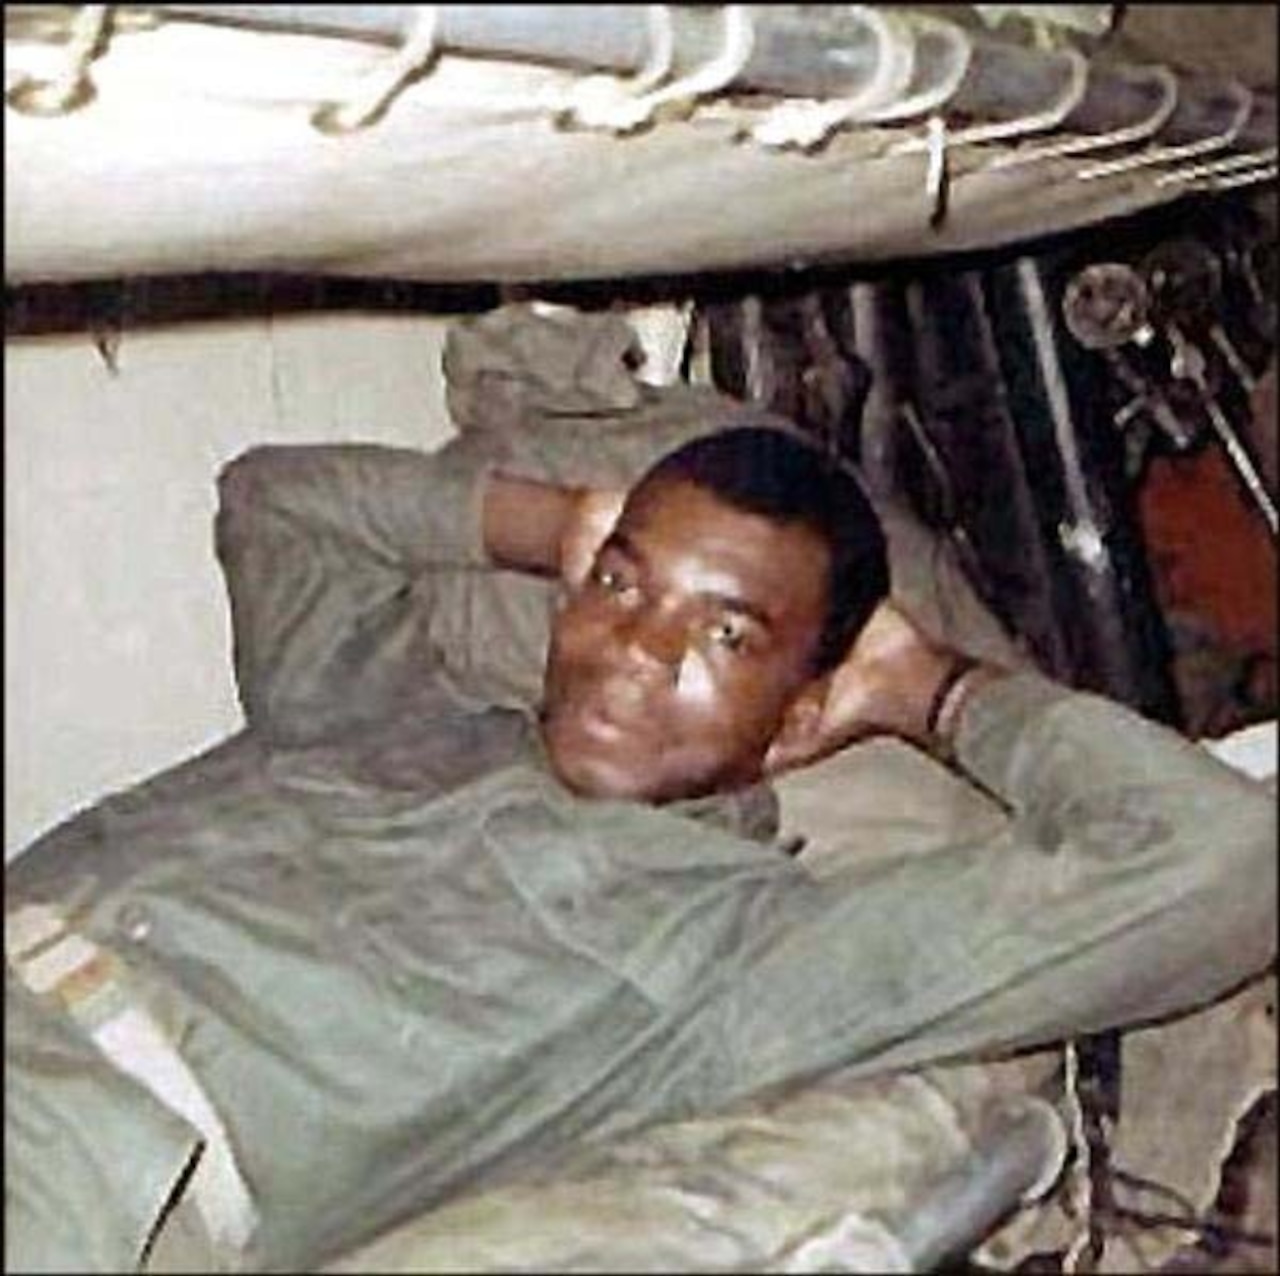 A young Marine in utility uniform relaxes in a bunk with his hands behind his head.